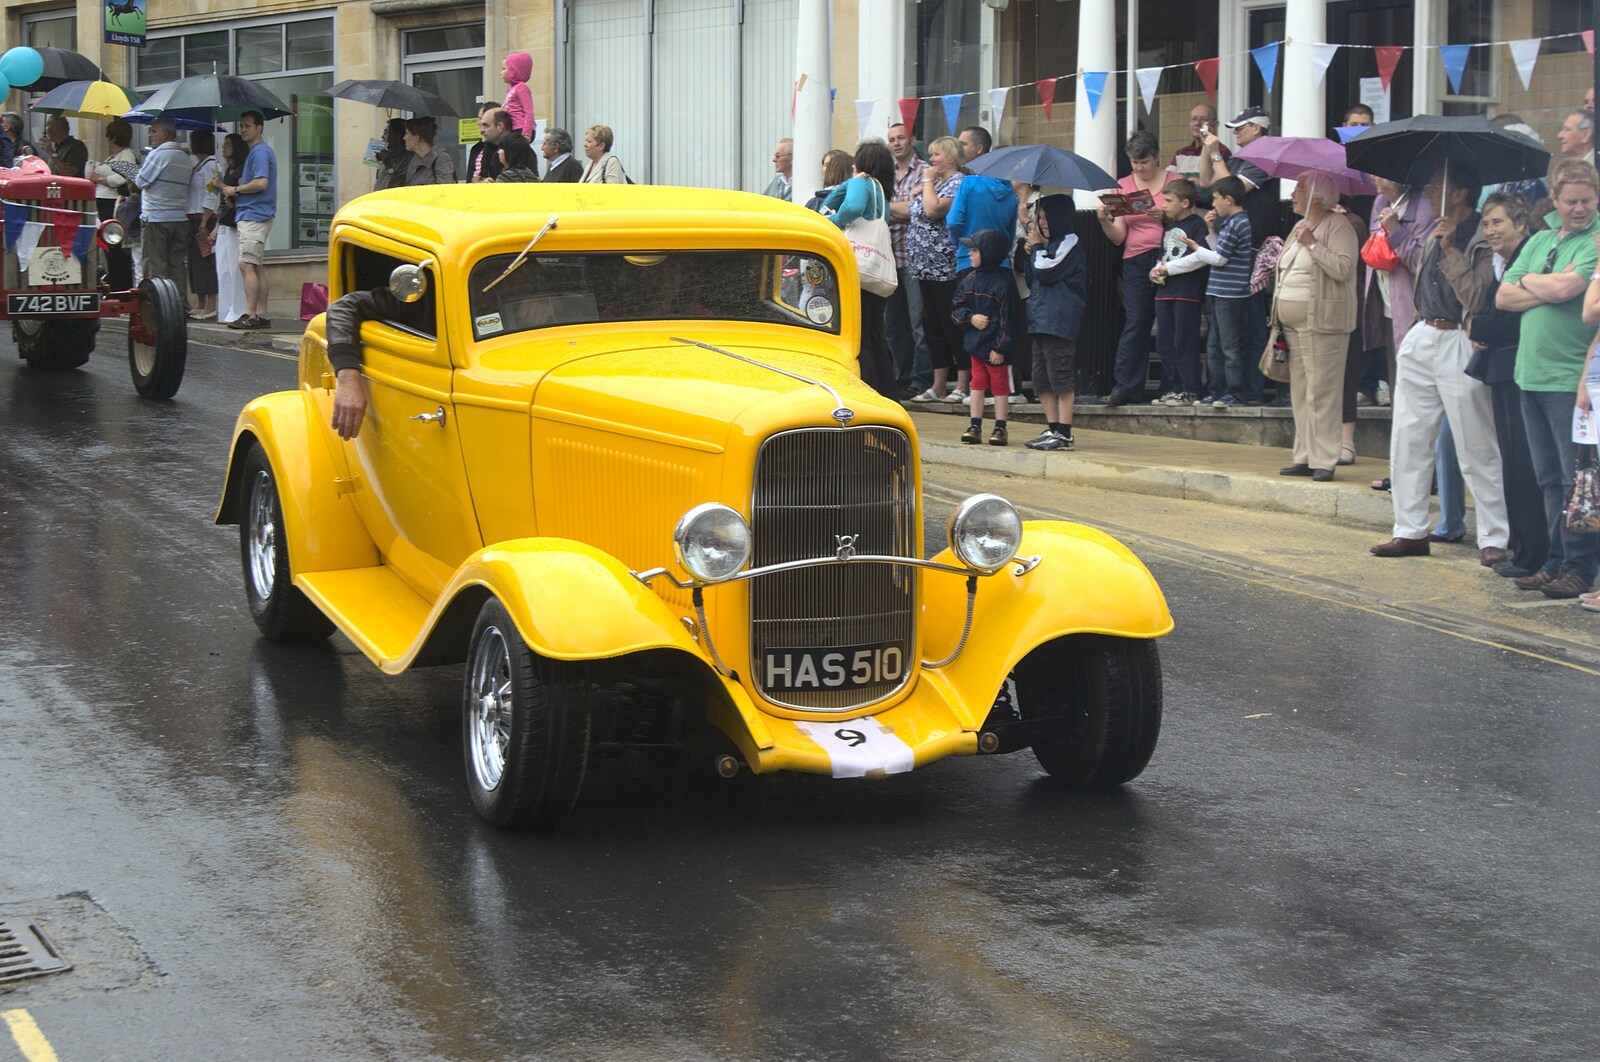 A bright yellow Hot Rod from Diss Carnival Procession, Diss, Norfolk - 21st June 2009